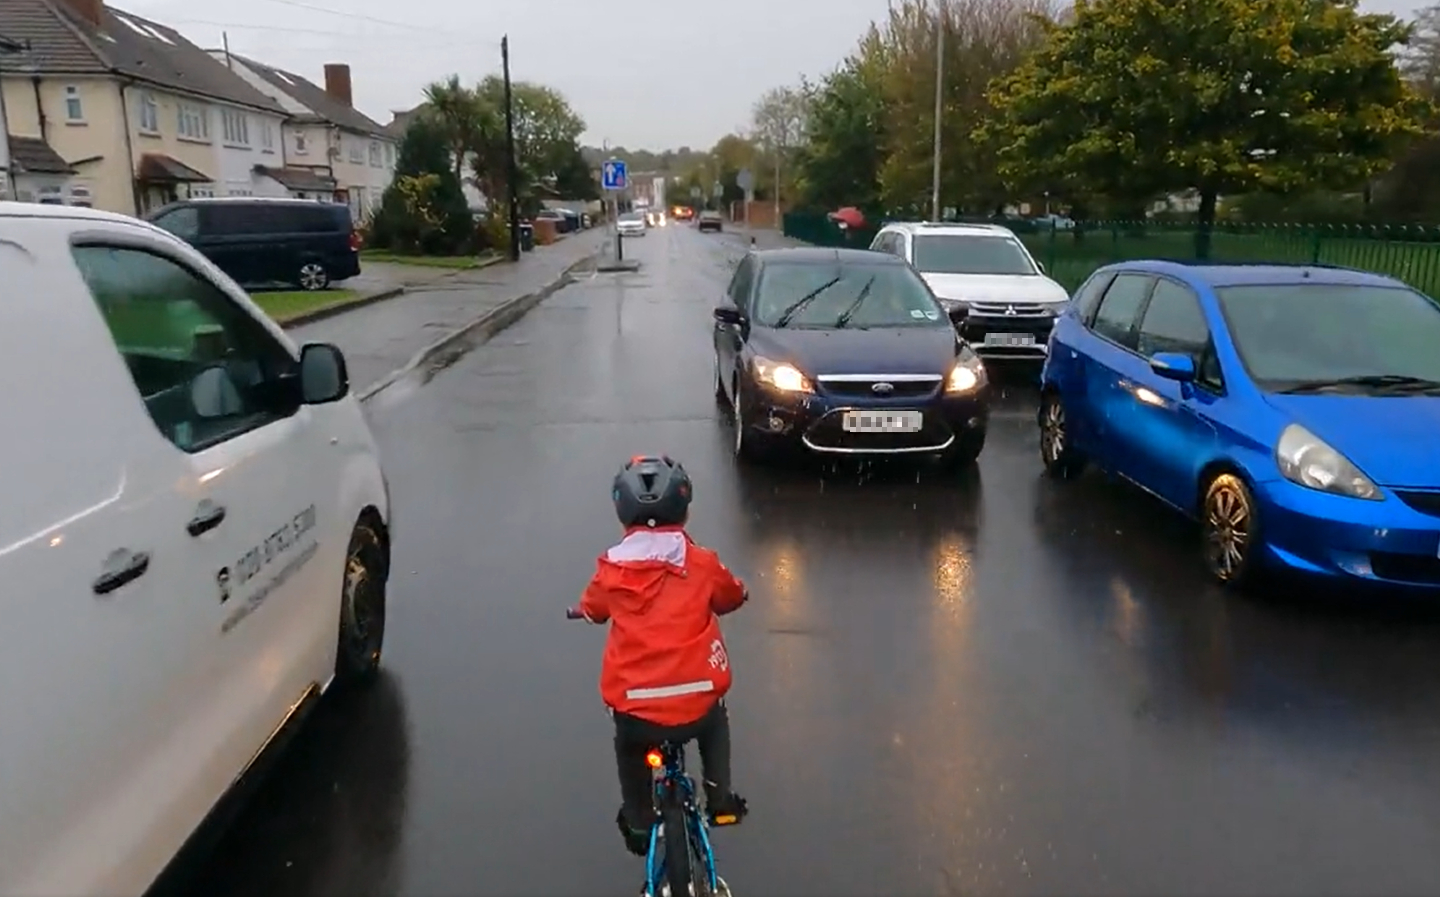 Jeremy Vine criticises driver for passing five-year-old cyclist, sparking online debate